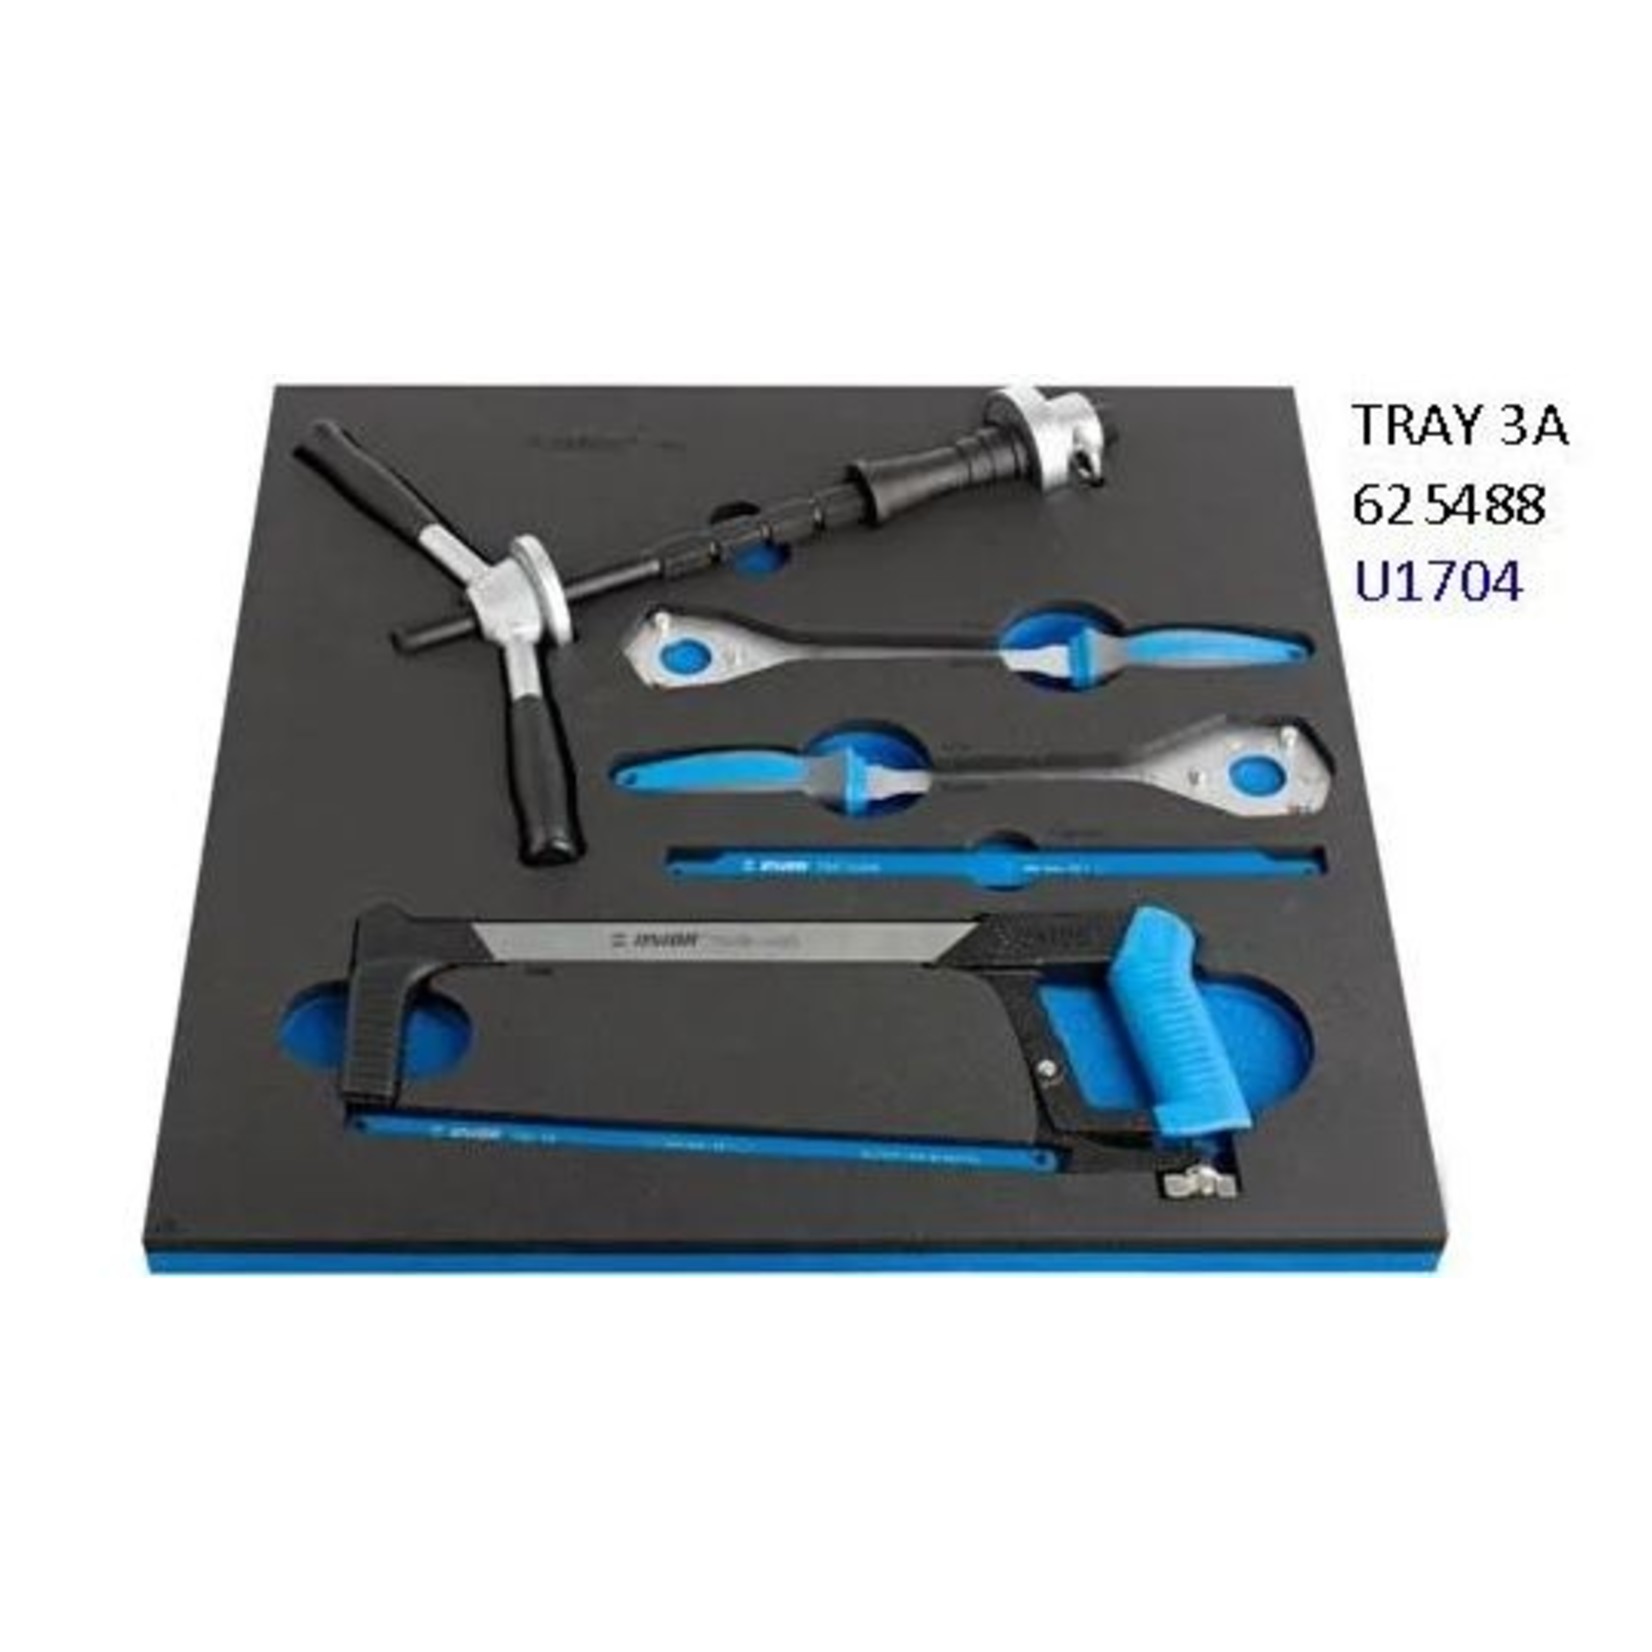 unior Unior Professional Master Workbench - Tray 3A - Inc 5 Quality Bicycle Tools